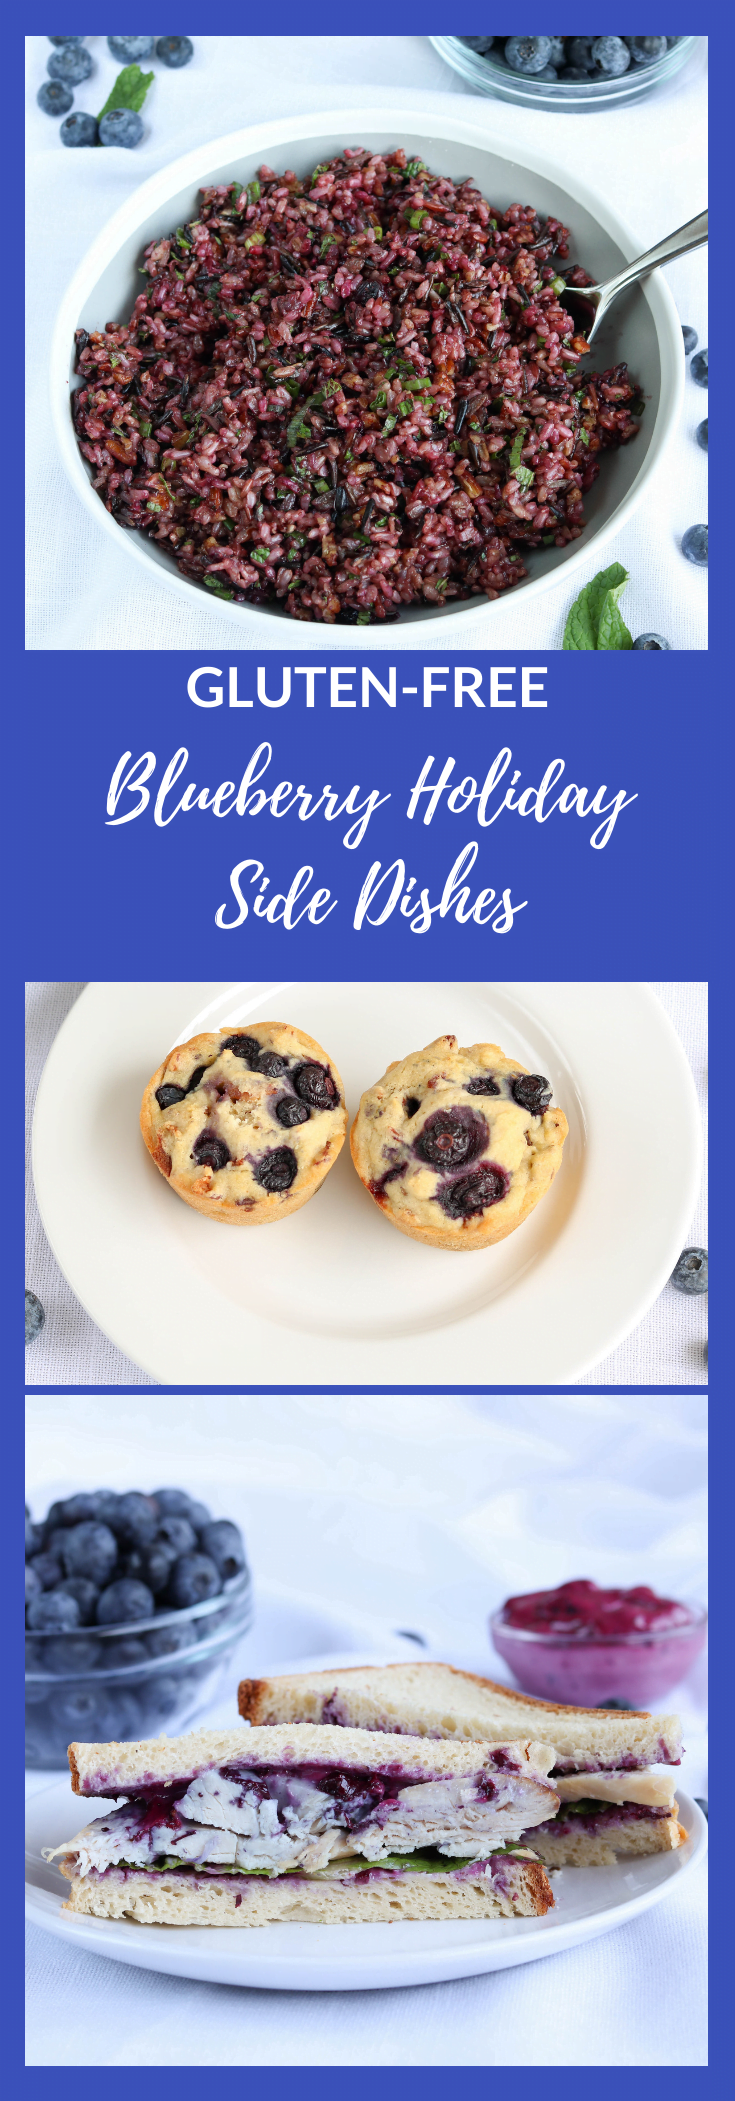 Blueberry Holiday Side Dishes